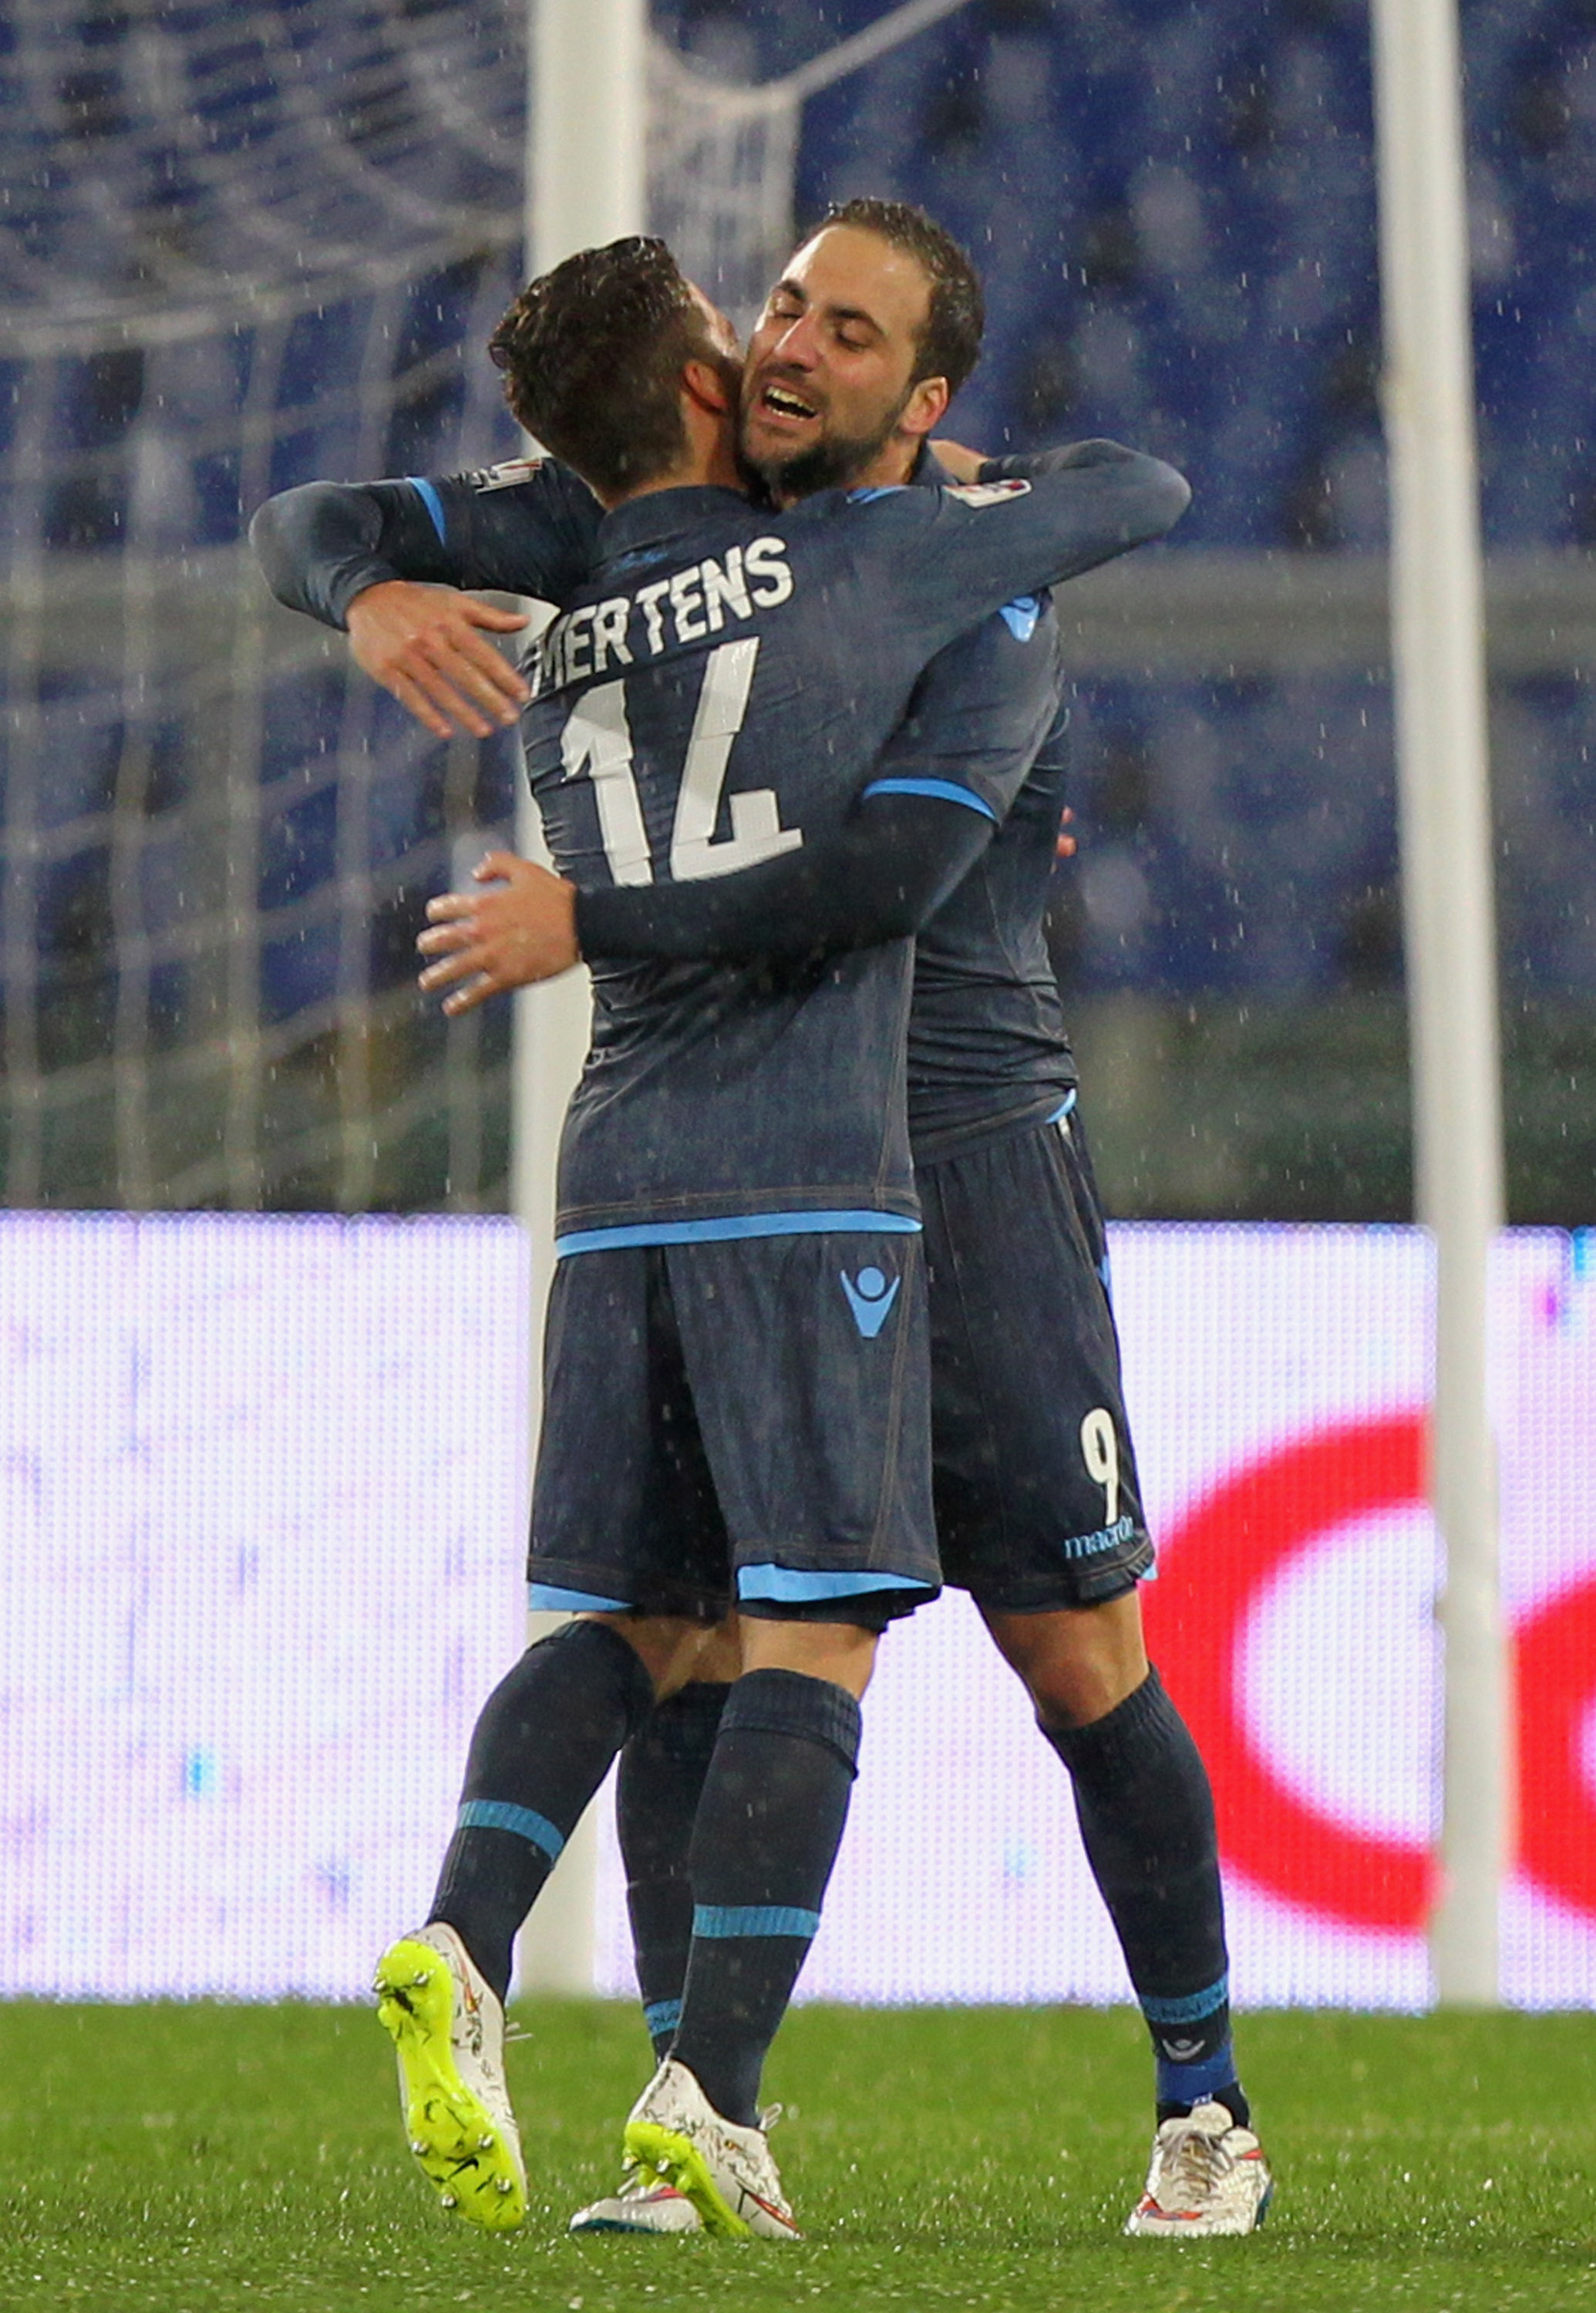 Dries is so little he has to go up on his tip-toes to hug Pipita. That's adorable.